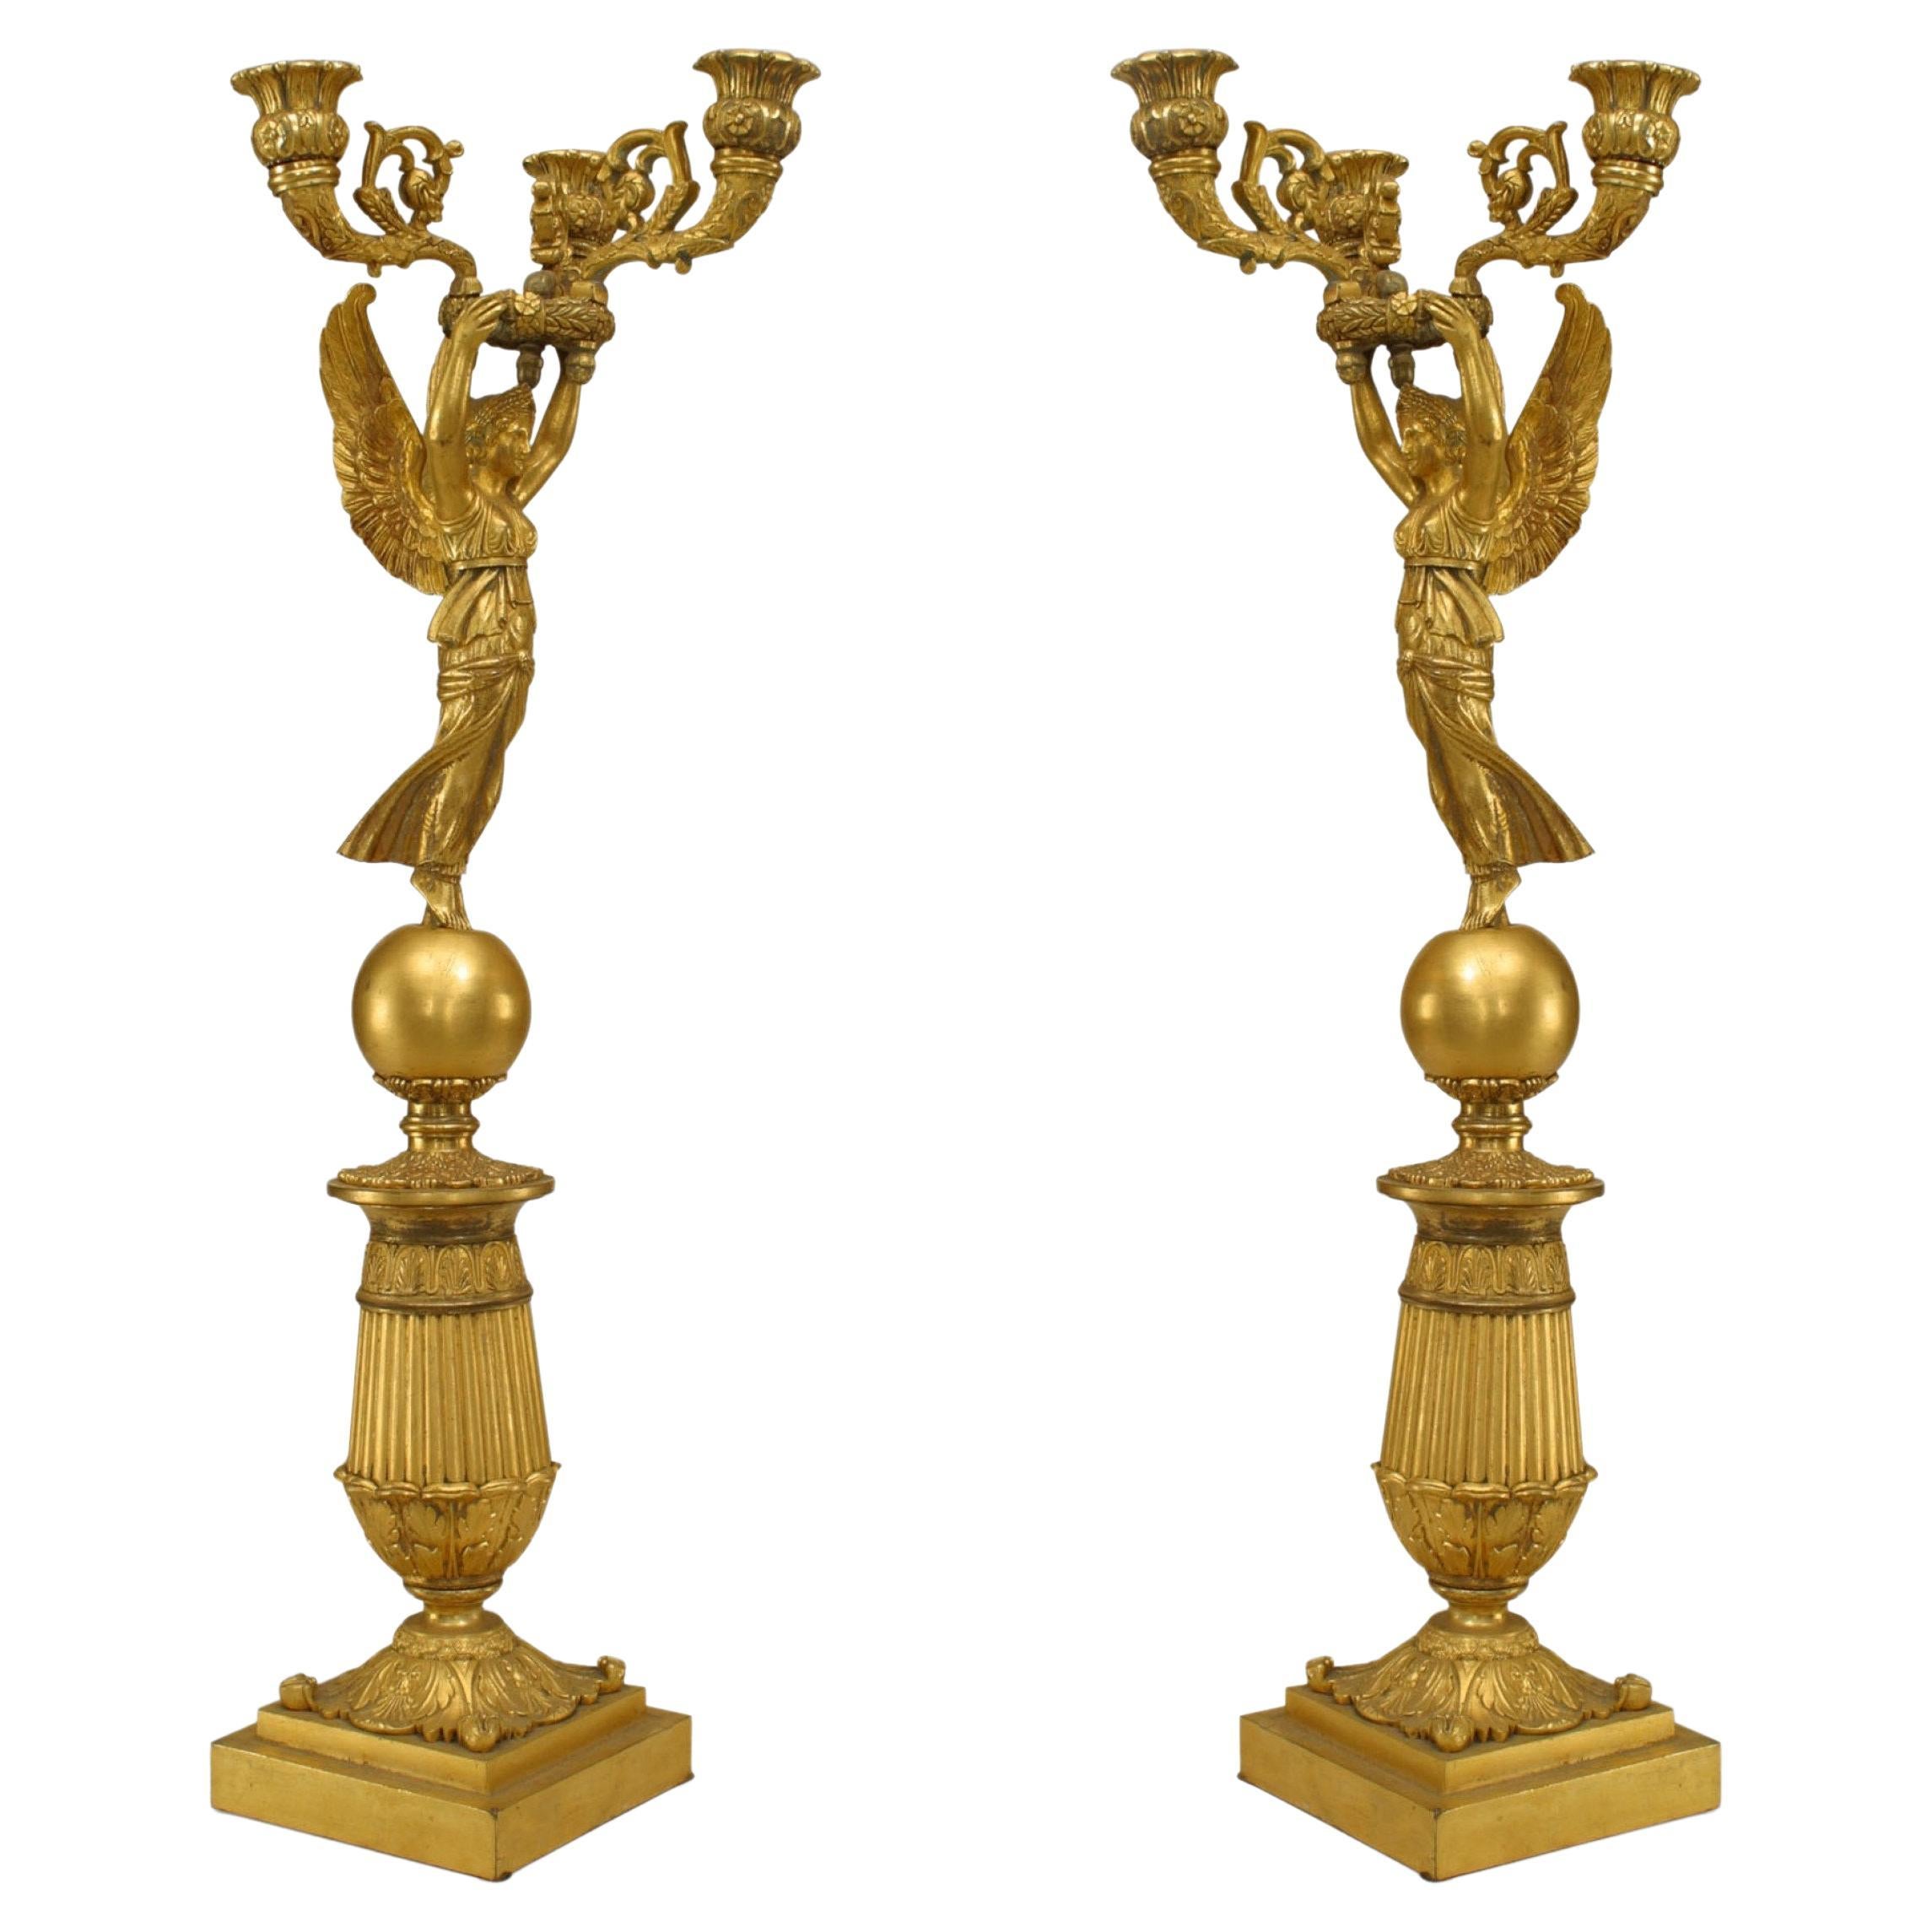 Pair of French Empire Bronze Dore Candelabras with Winged Figures For Sale